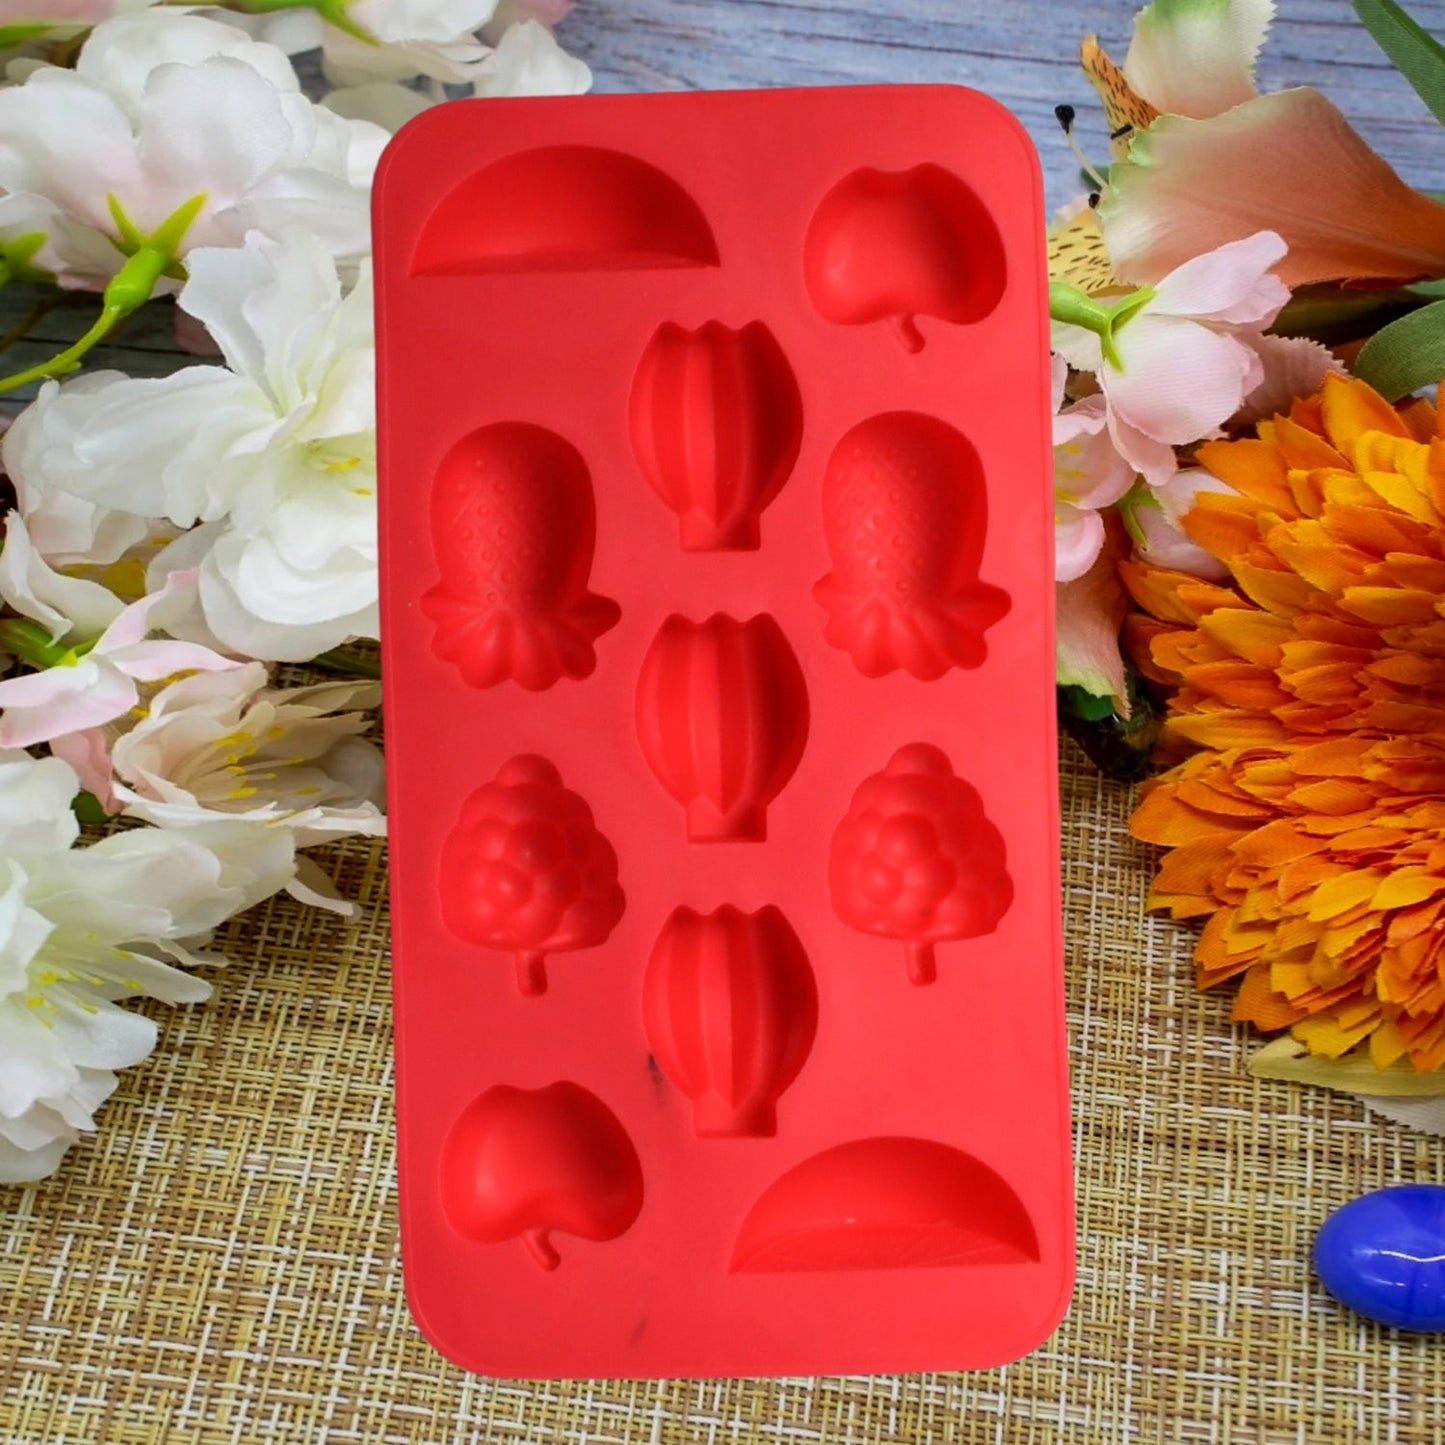 Fruit Theme Silicone Fondant Mold Ice Cube Mold Chocolate Mold 11 Cavity Mold Tray for Home Kitchen Tool